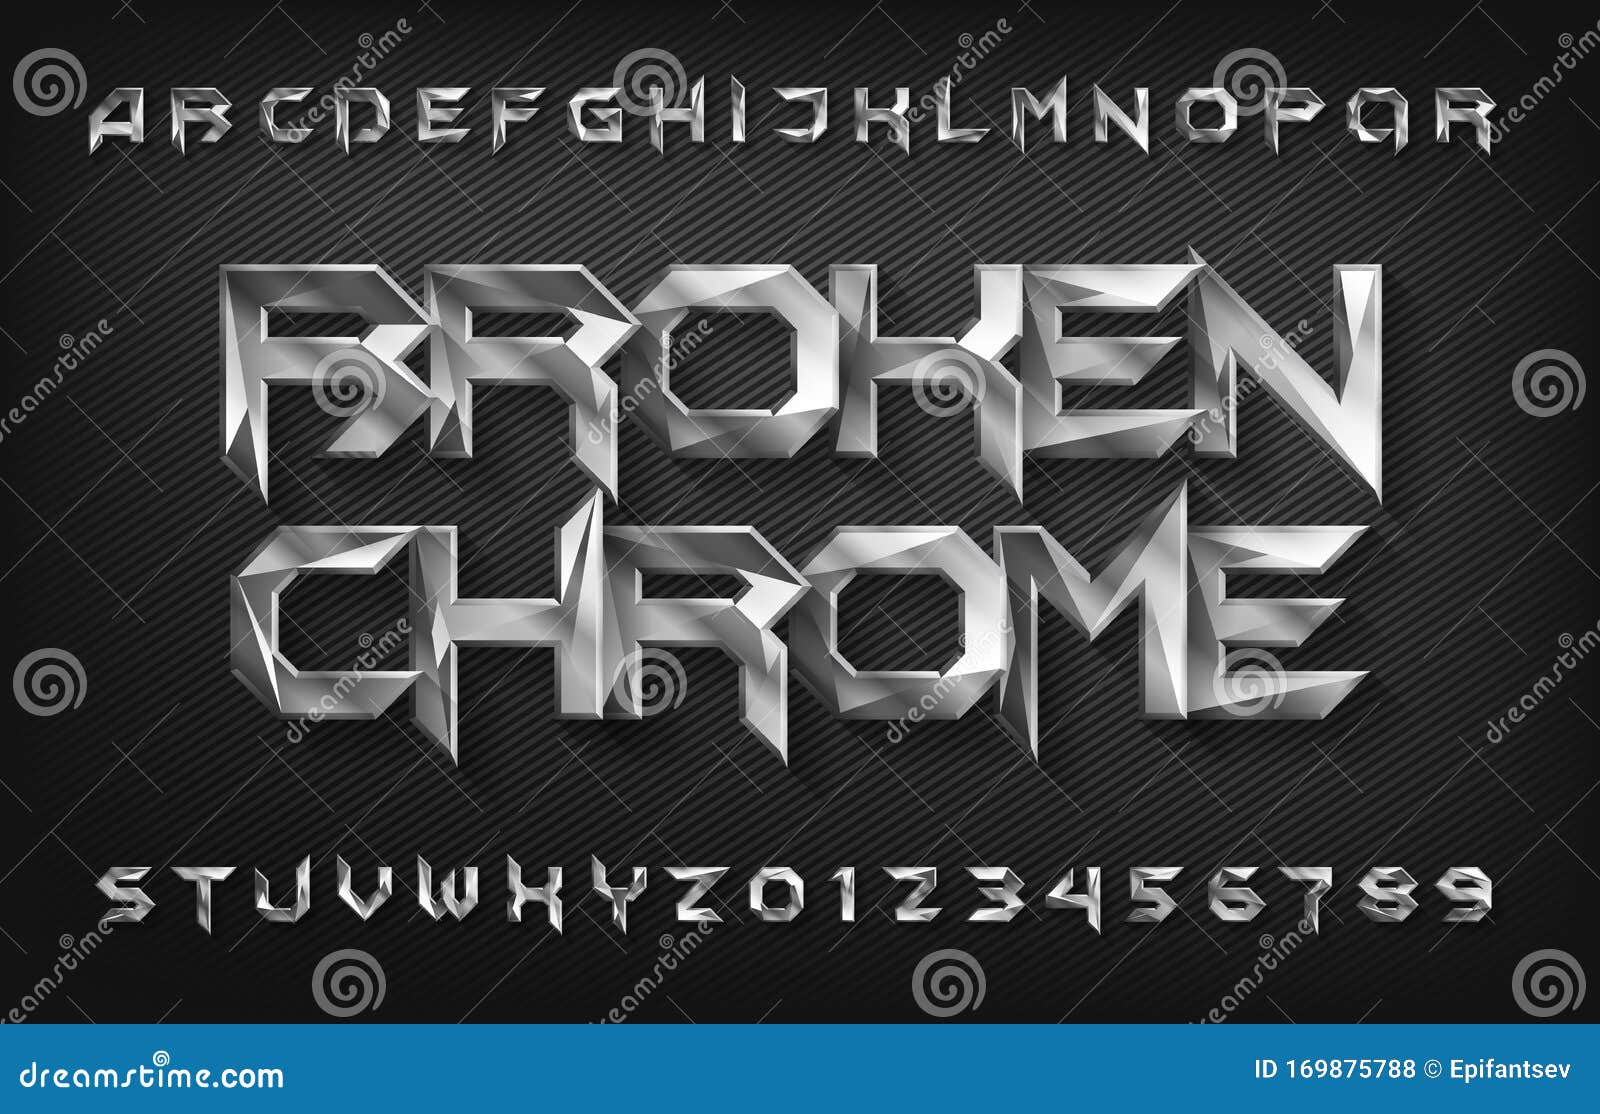 broken chrome alphabet font. metal effect beveled letters and numbers.